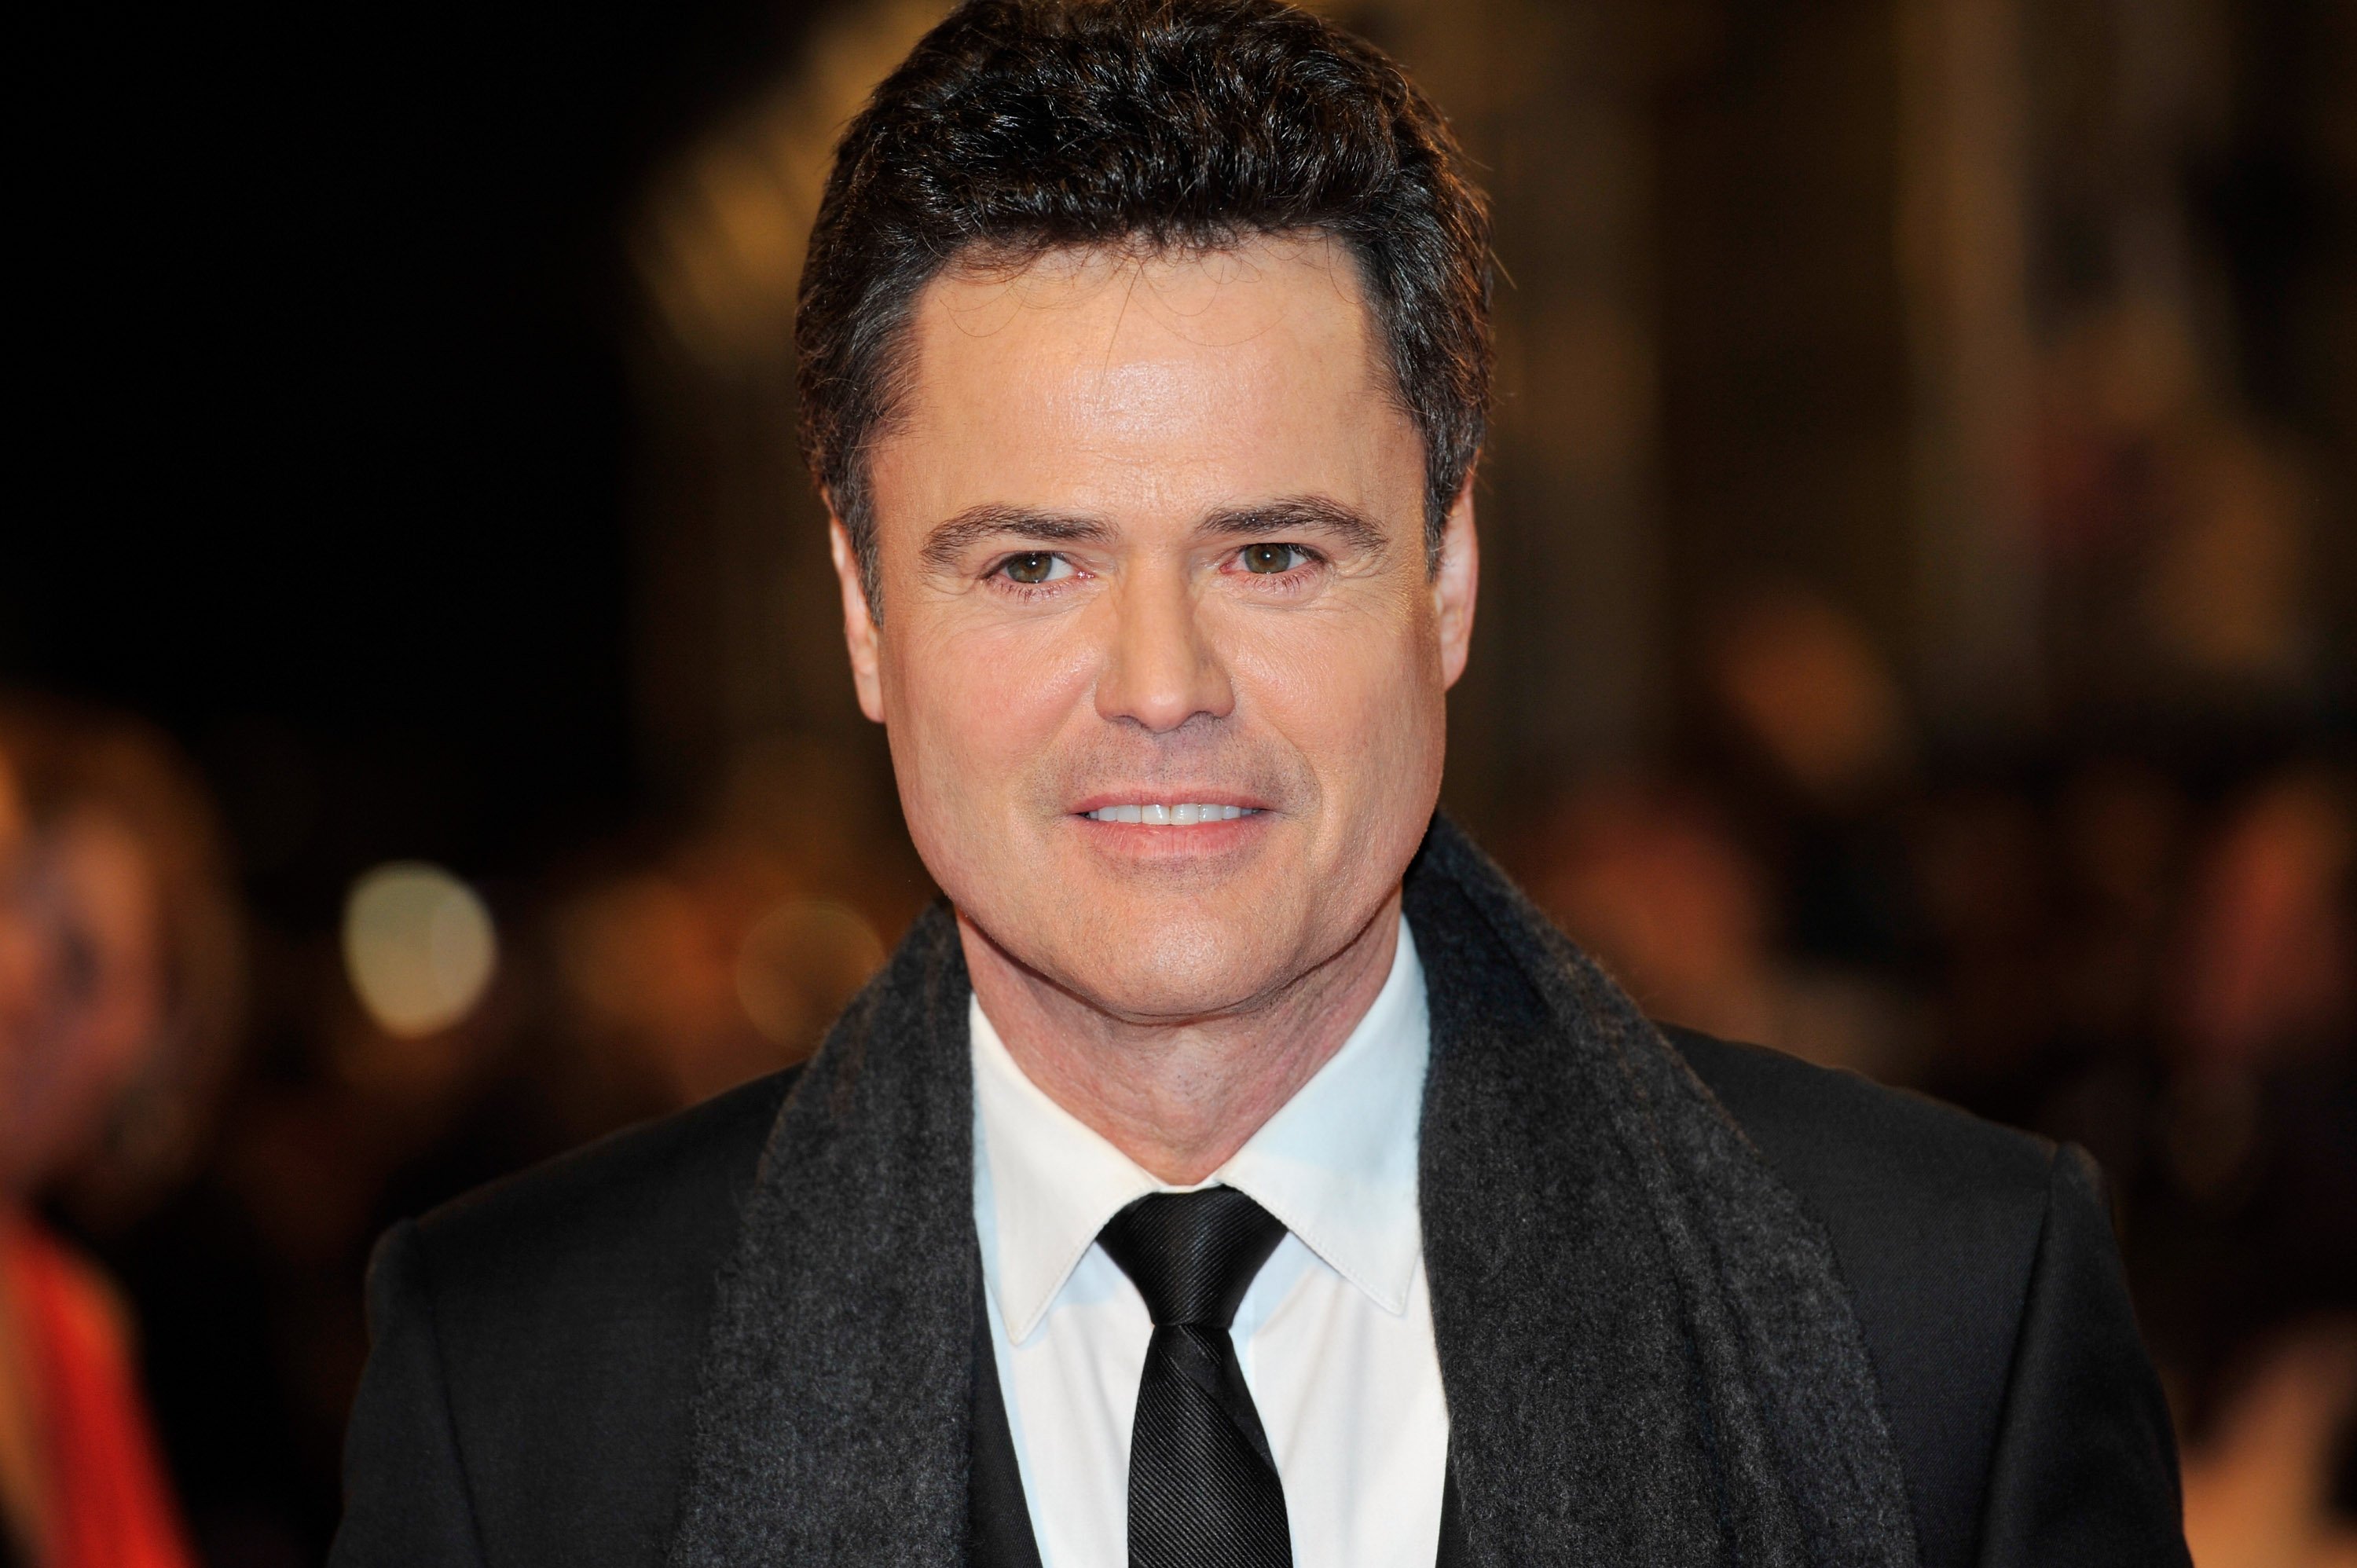 Donny Osmond attends the National Television Awards in London, England on January 23, 2013 | Photo: Getty Images